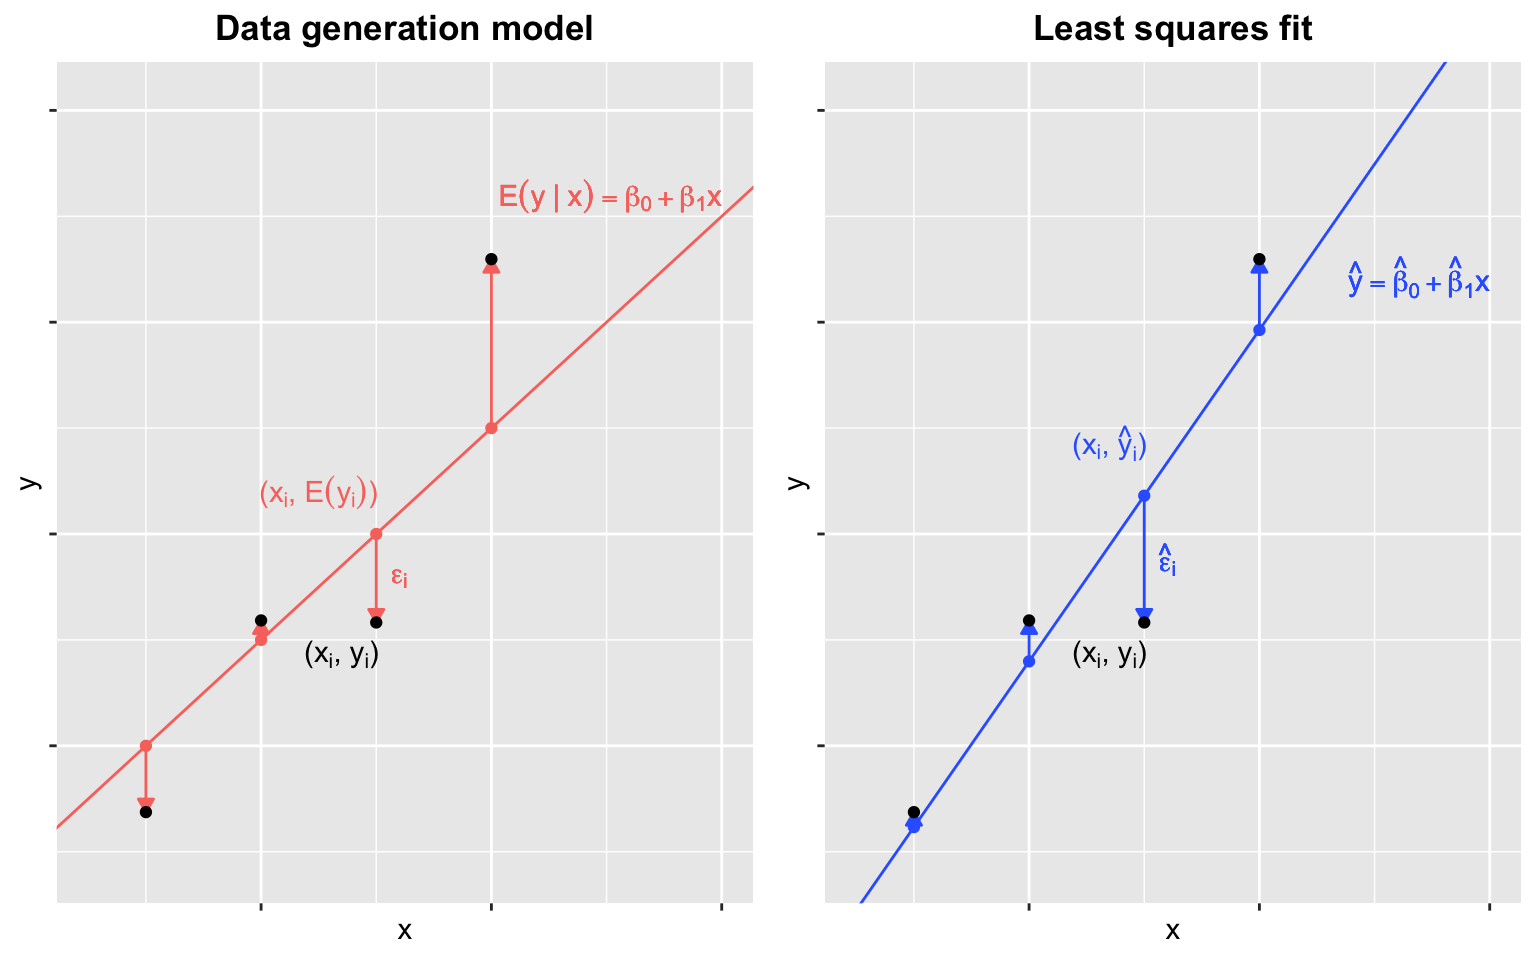 \label{fig:linModel} Linear regression. Data generation model (left) and least squares fit (right). The data points (black) are the same on both panels and simulated according to the linear regression assumptions. Note that the fitted line (right) does not coincide with the underlying 'true' model (left) and fits closer to the data points.